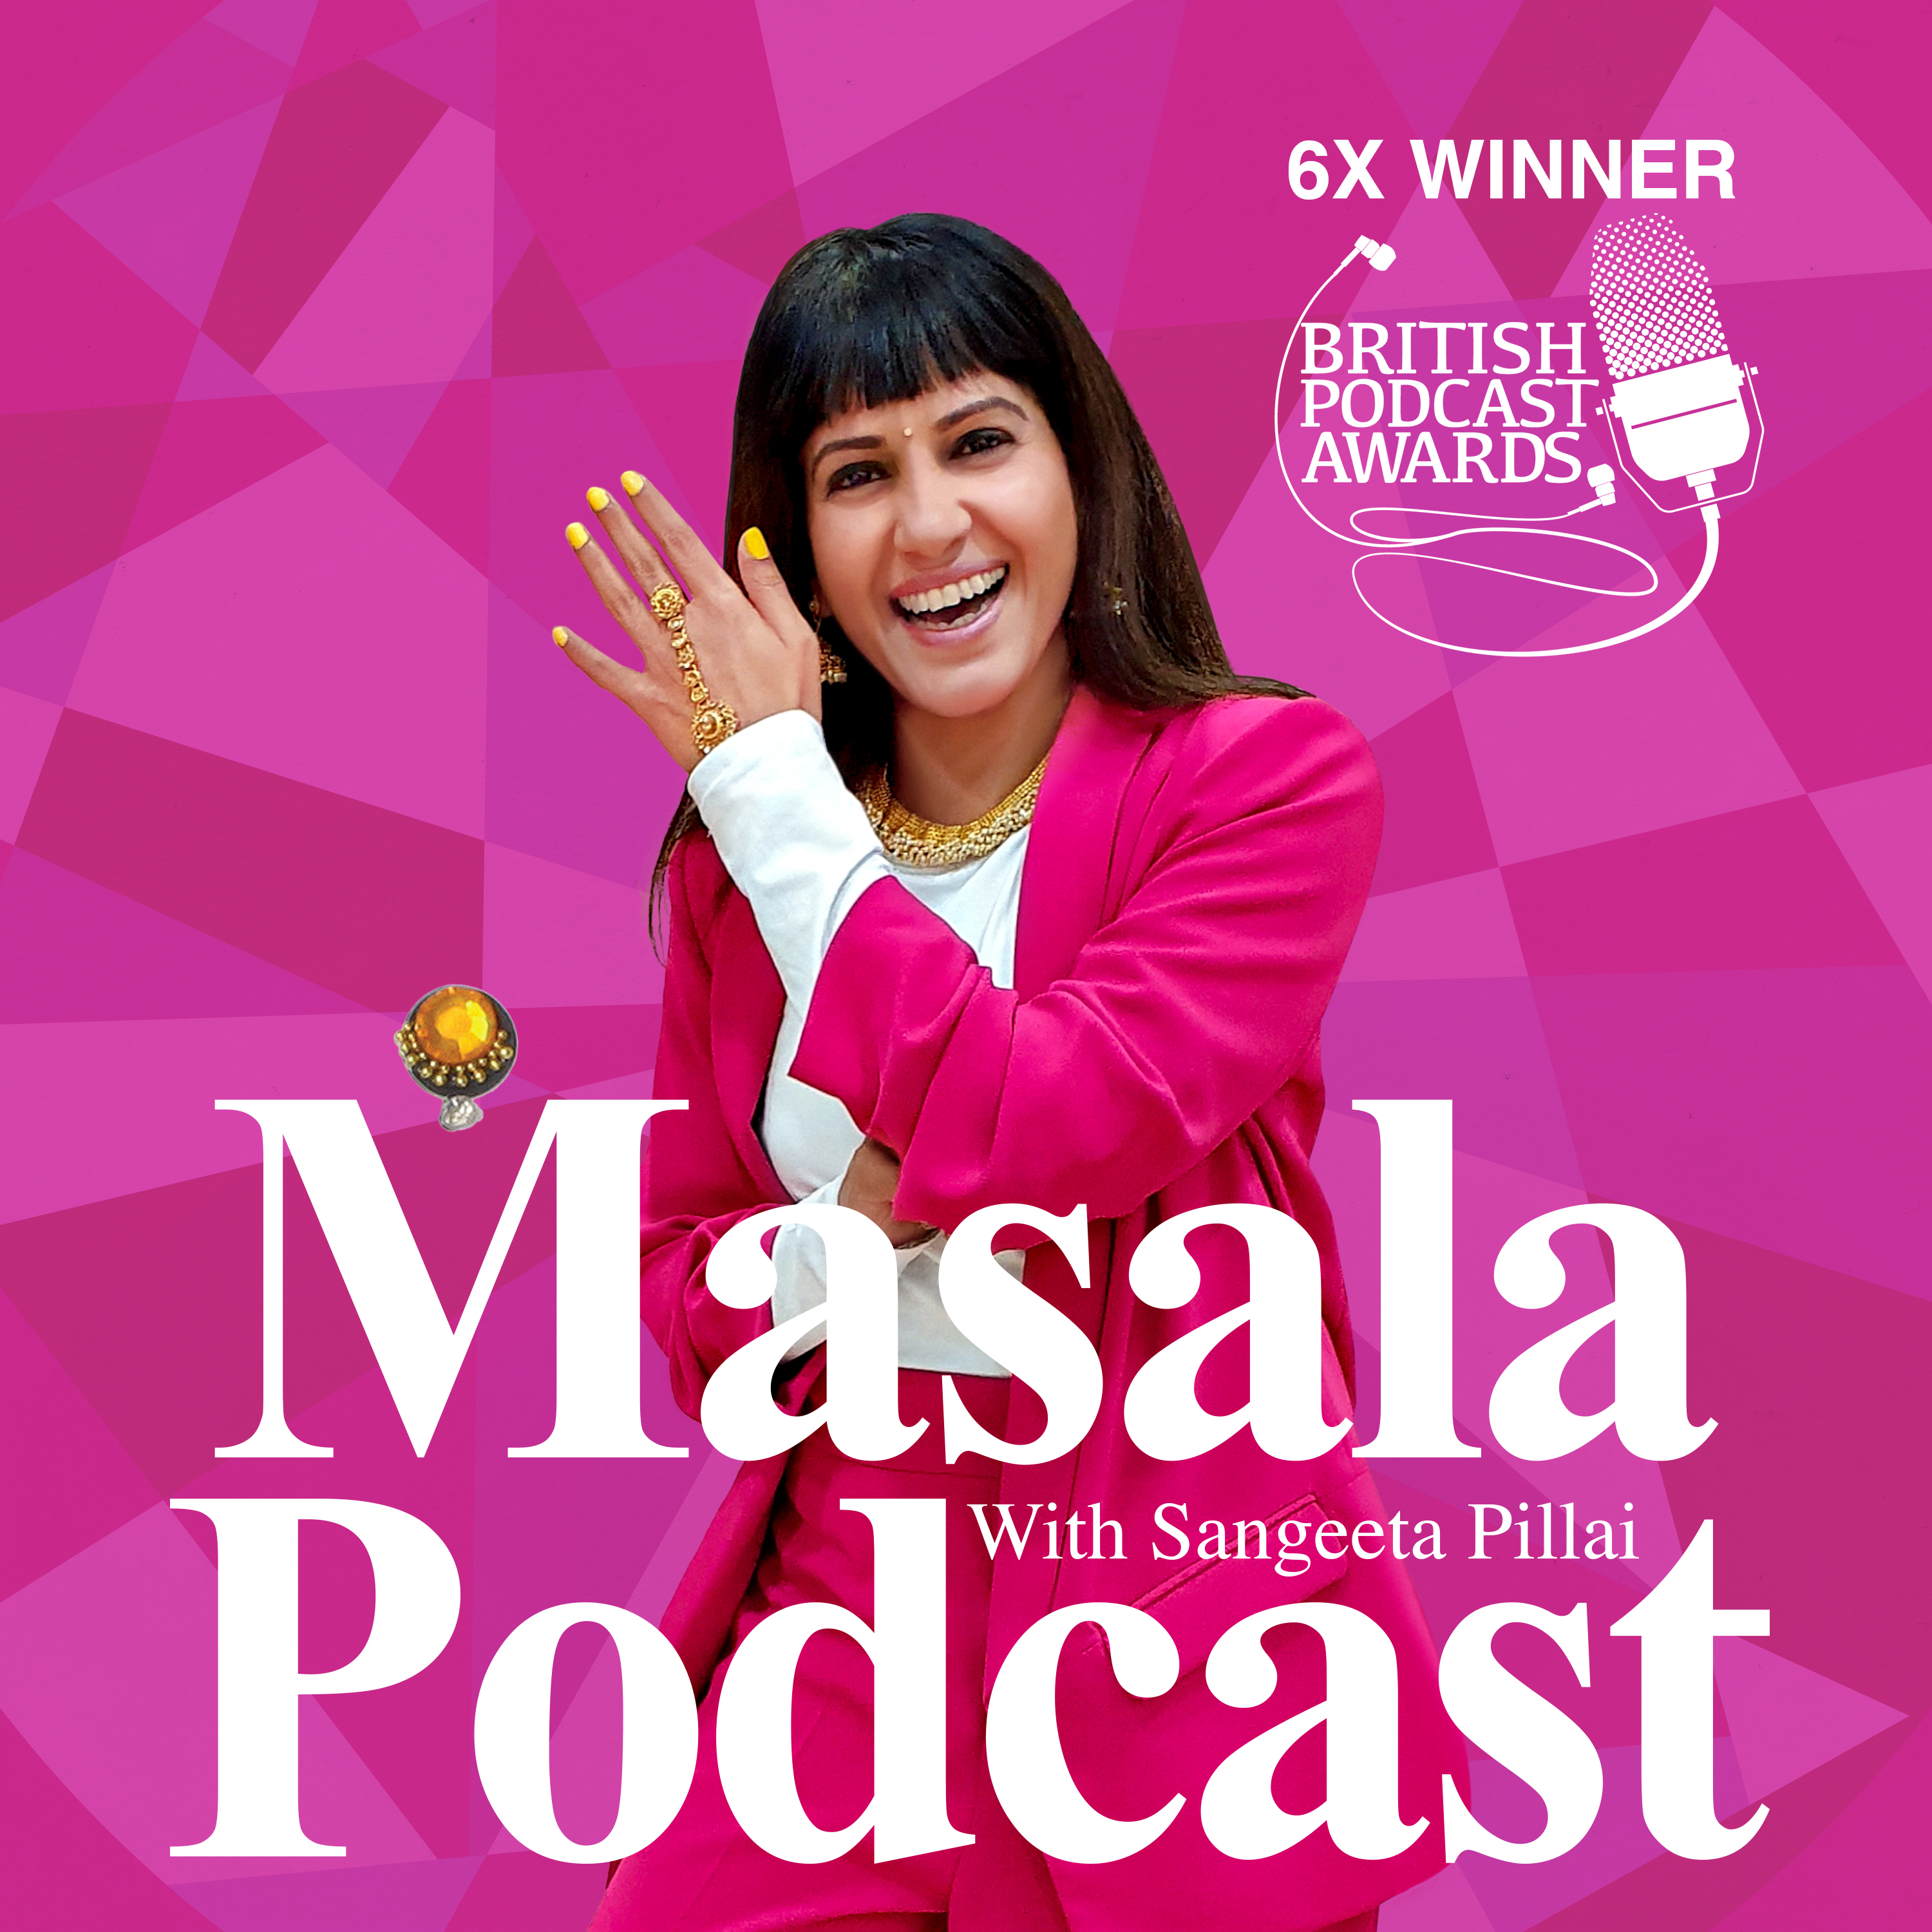 Masala Podcast: The South Asian feminist podcast